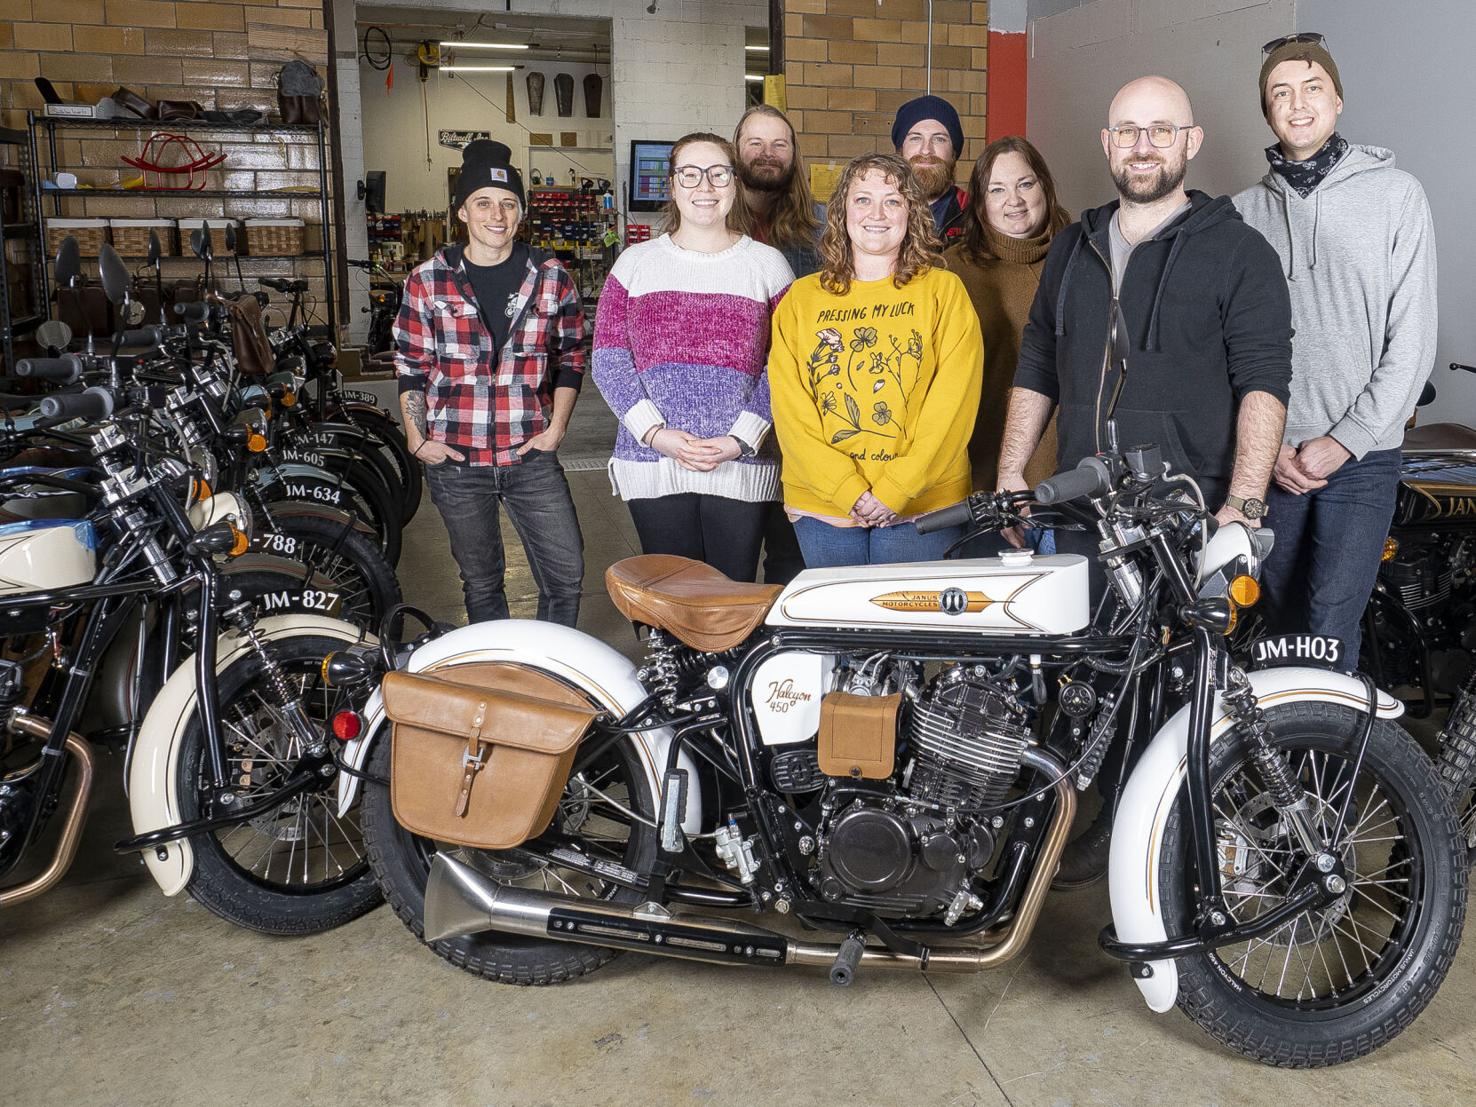 Janus Motorcycles co-founder meets with Sen. Young